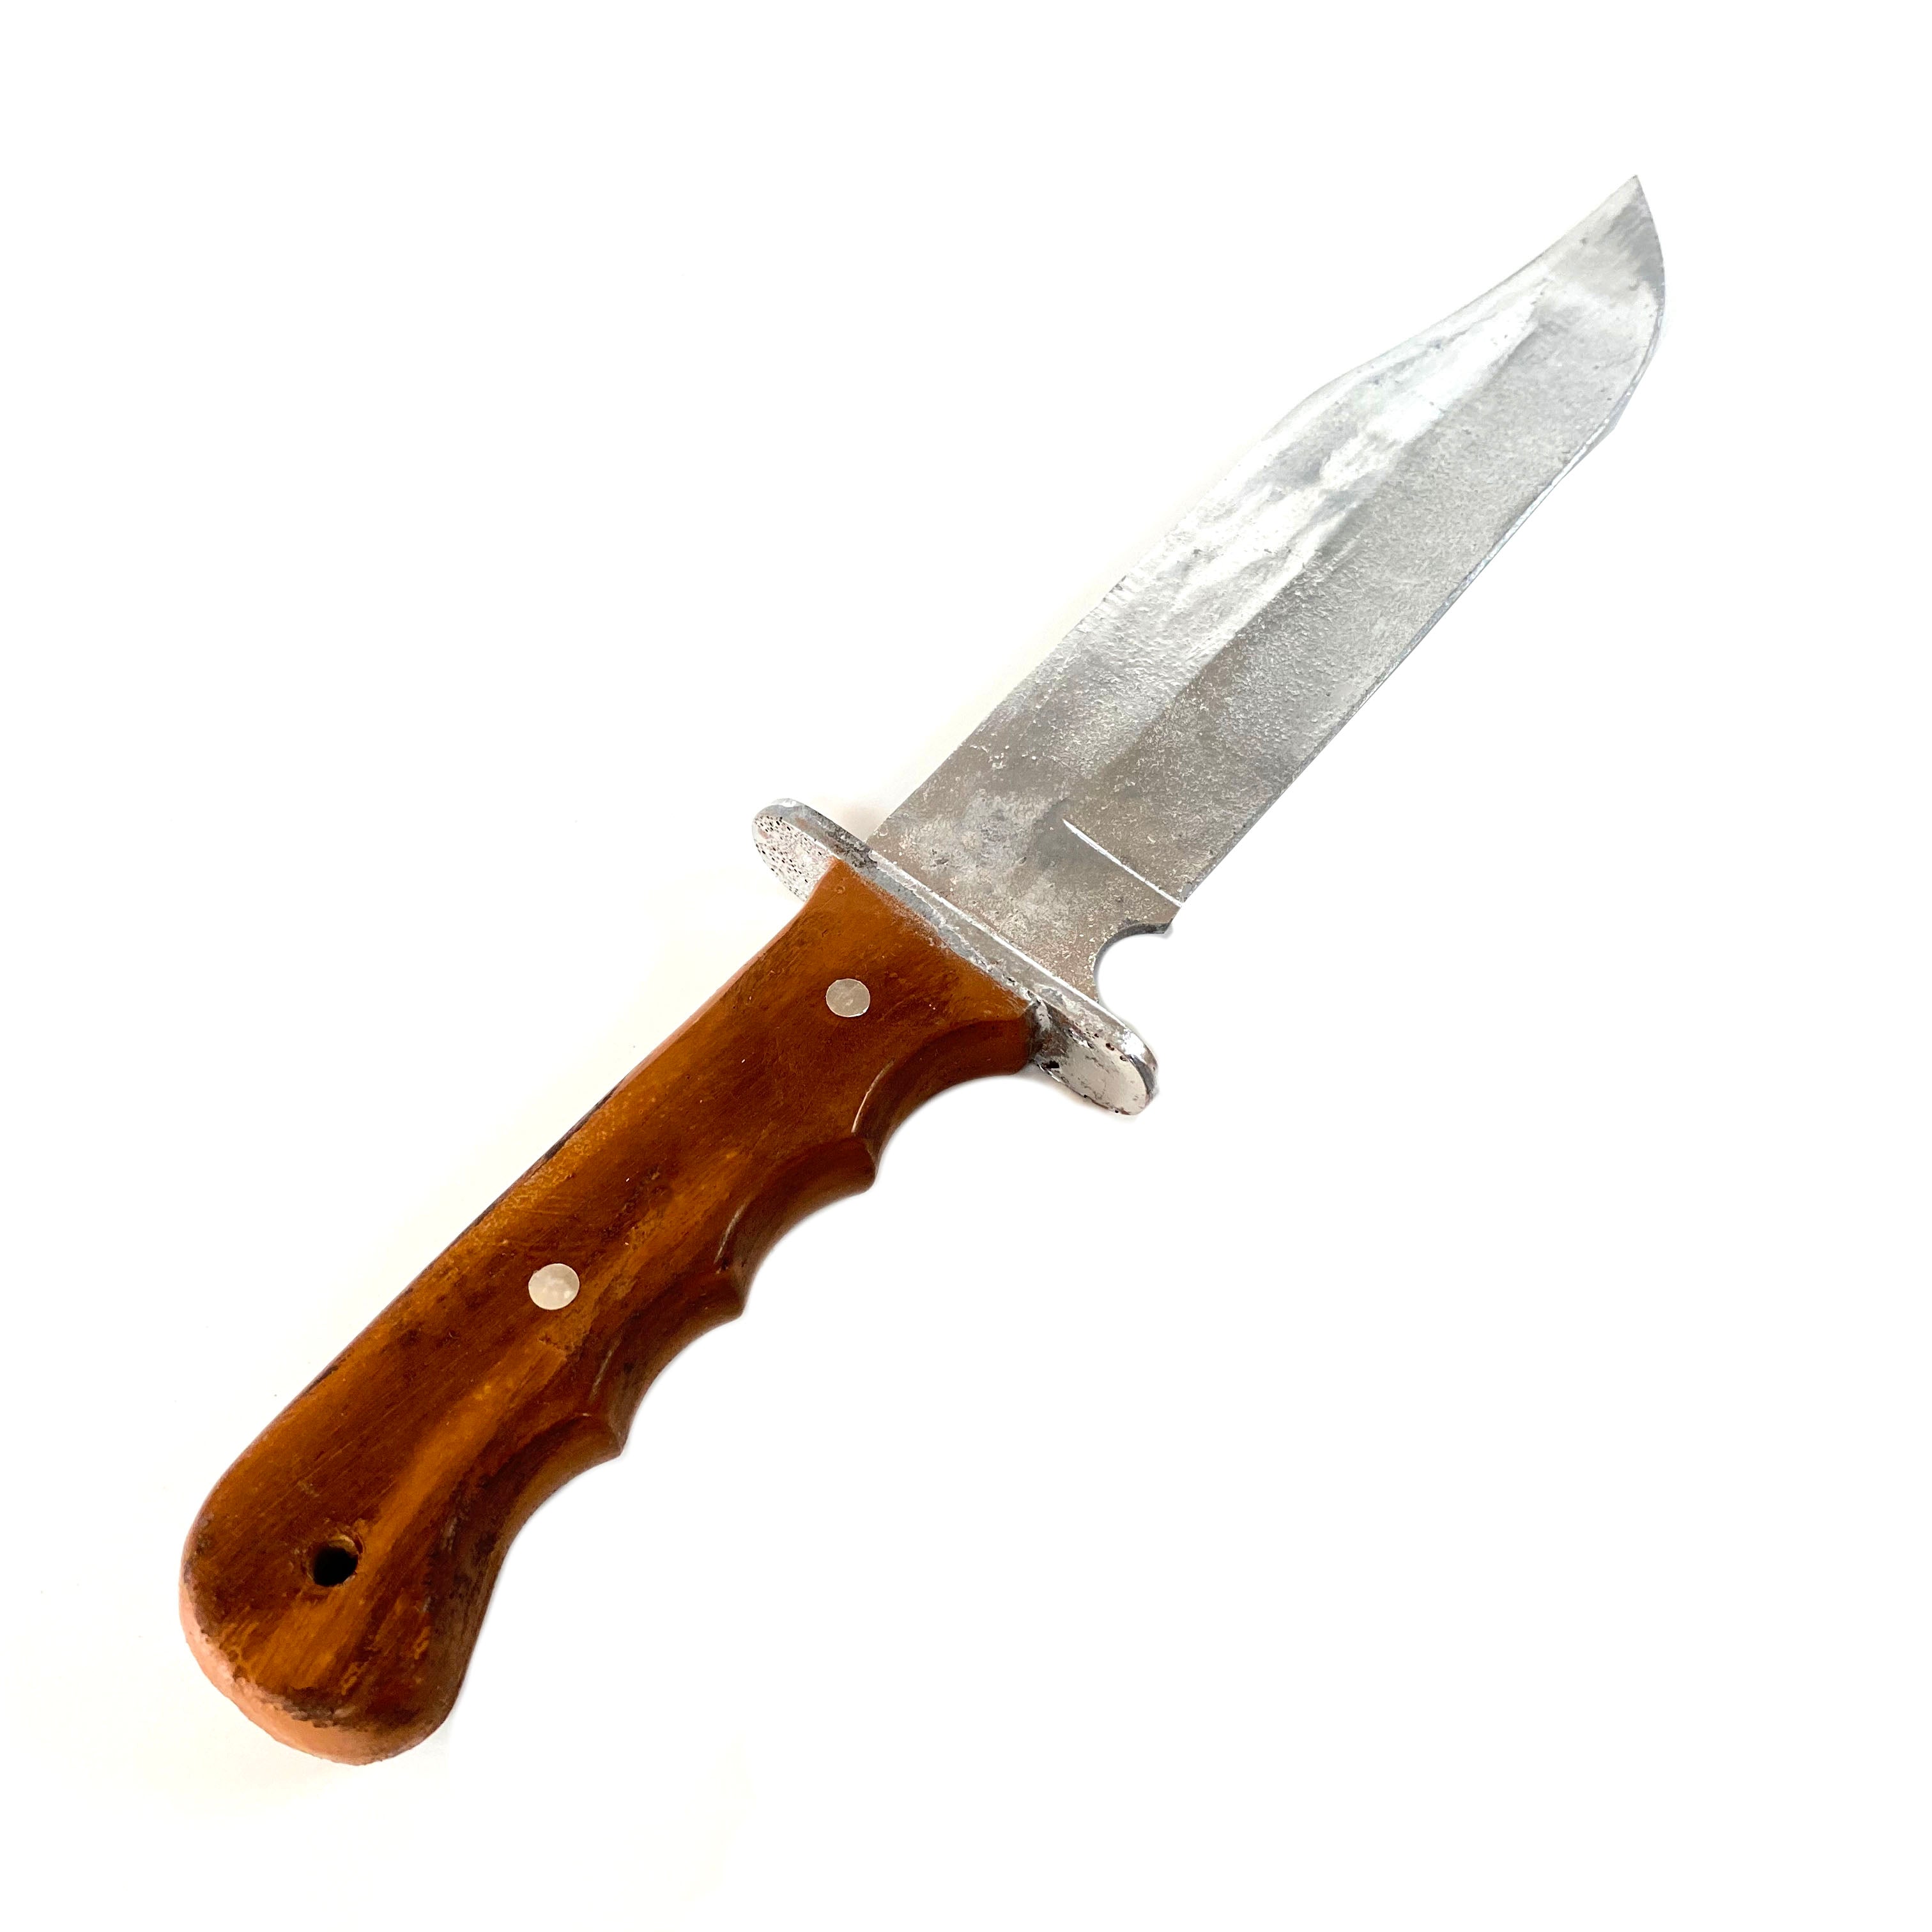 Rigid Plastic Winchester Bowie Knife Replica - New - Silver Blade with Brown Handle